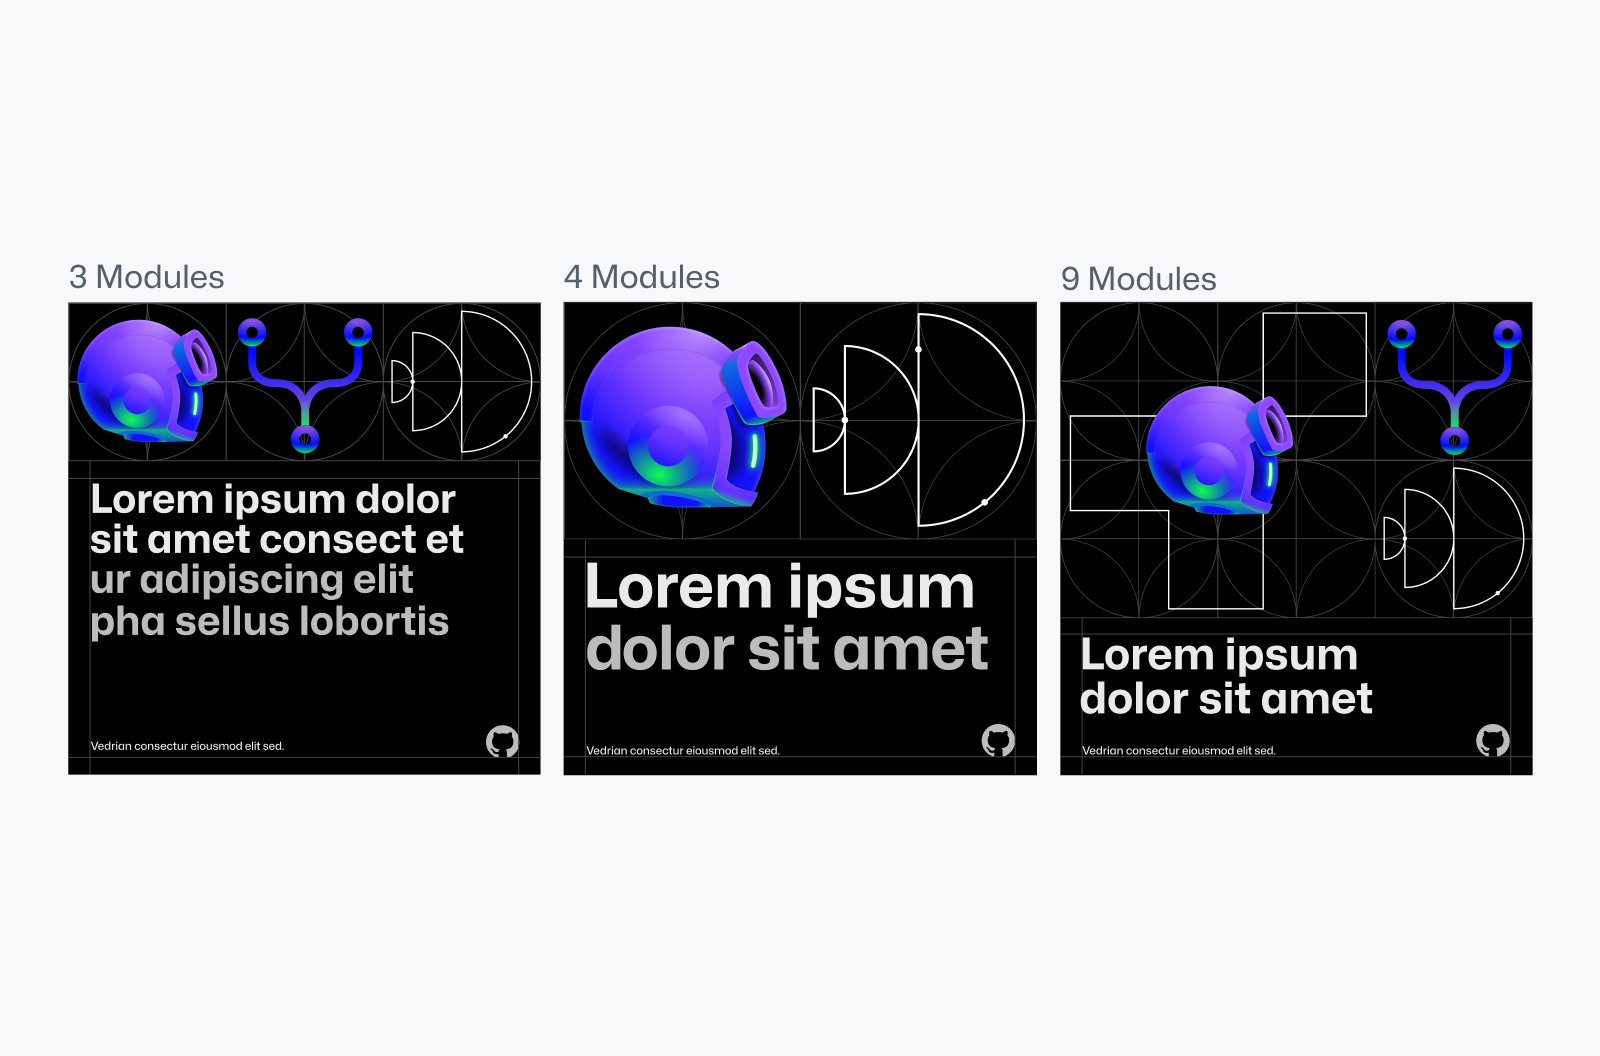 Three black square compositions side by side. Text above them reads "3 modules," "4 modules," and "9 modules" respectively. Compositions feature placeholder lorem ipsum text on the bottom in white and light gray, with abstract illustrations on the top.